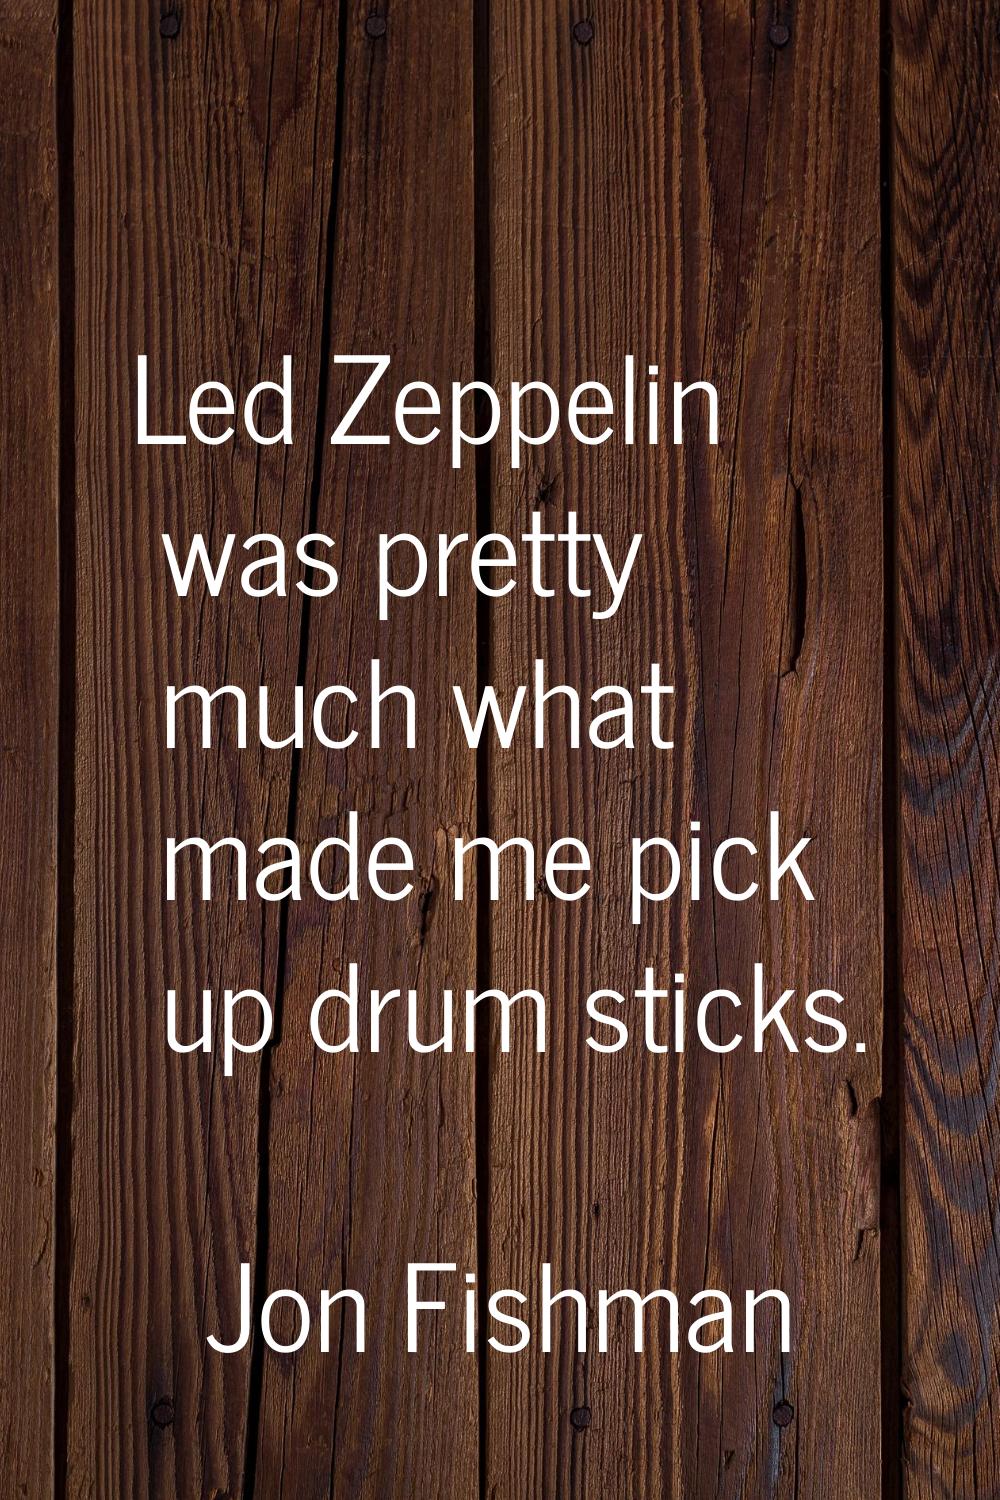 Led Zeppelin was pretty much what made me pick up drum sticks.